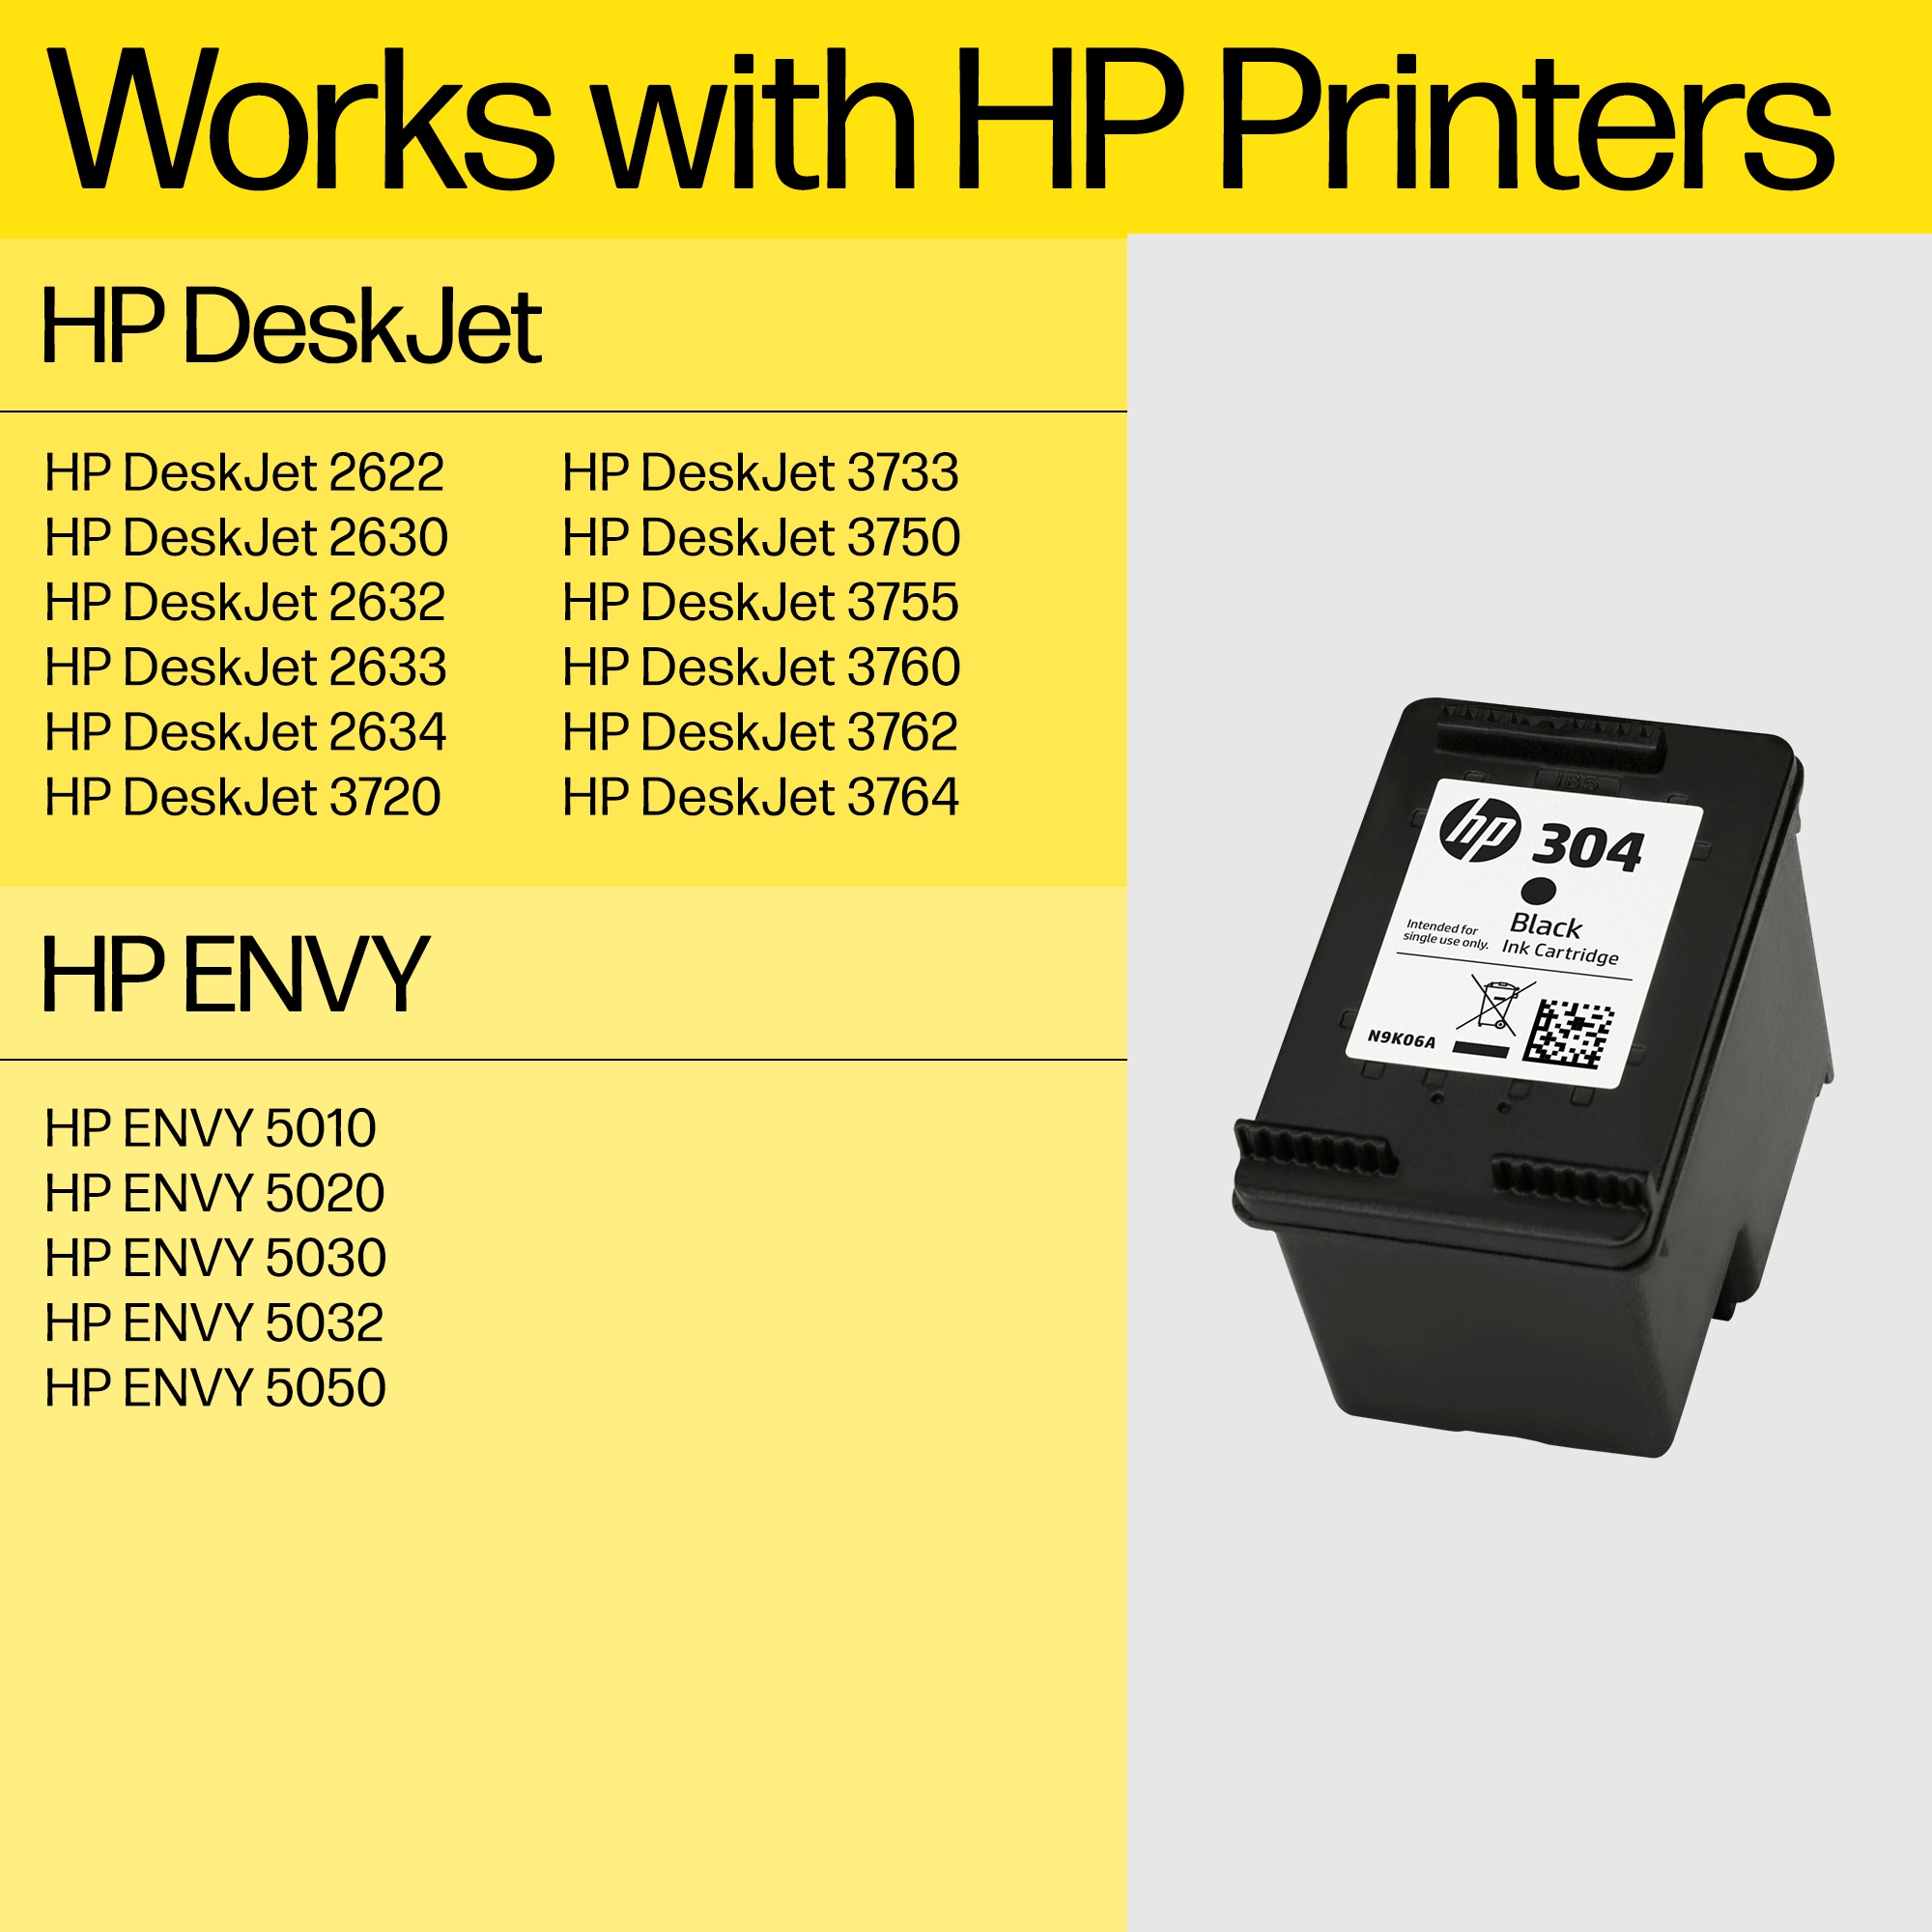 pg 120 DeskJet for stock Printhead 3JB05AE/304 in pack Pack=2 2620/3720, to - In Channel + HP multi HP black The pg color 14571 100 sell Stock for + distributor/wholesale resellers cartridge